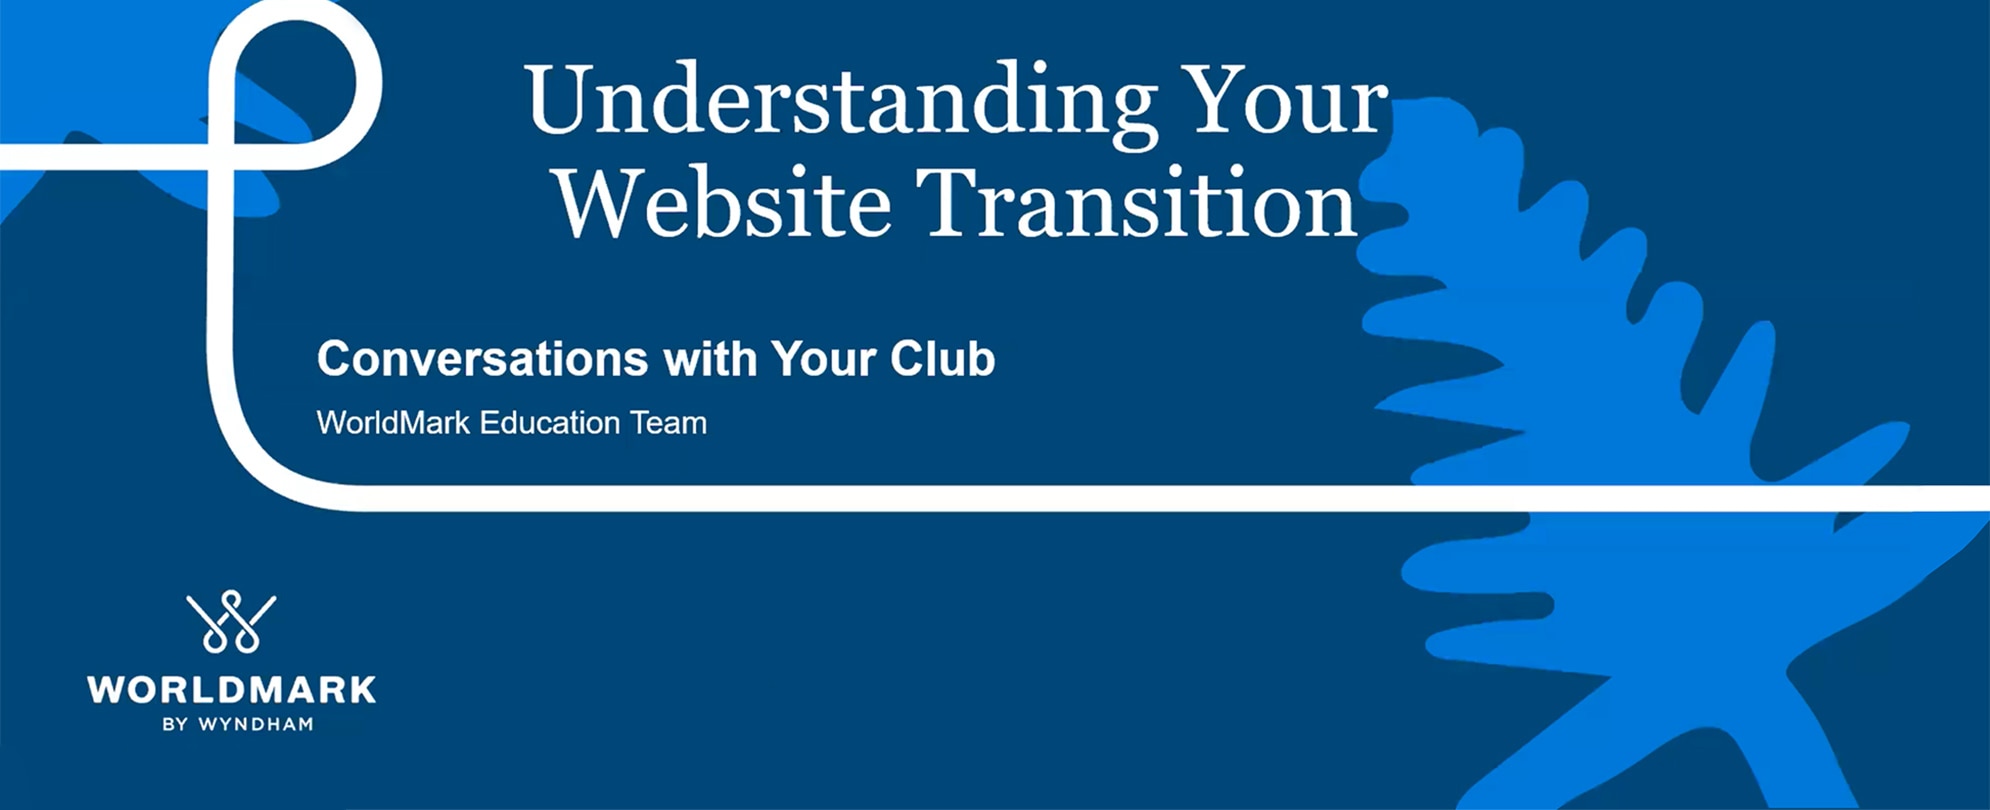 Understanding Your Website Transition-Conversations with Your Club.